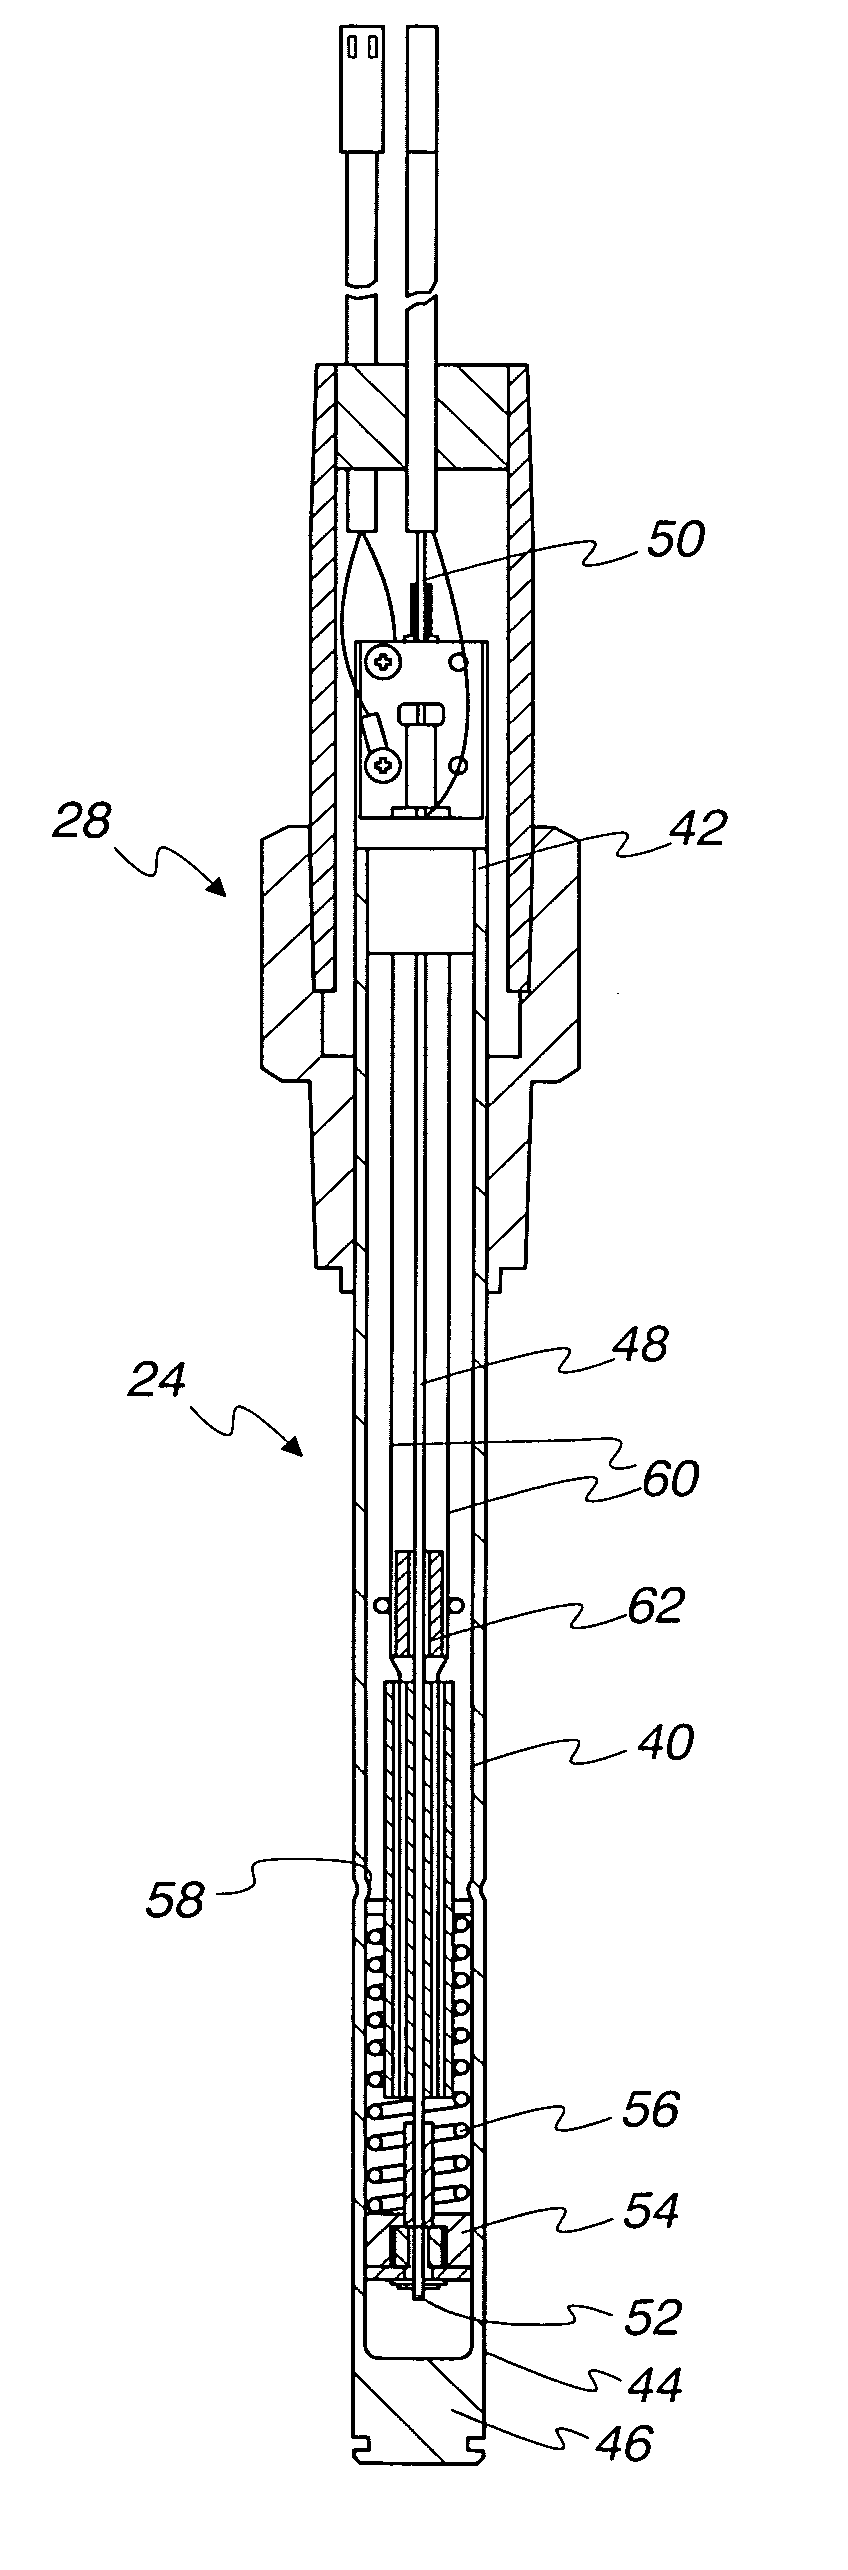 Magnetostrictive transmitter with improved piezoelectric sensor